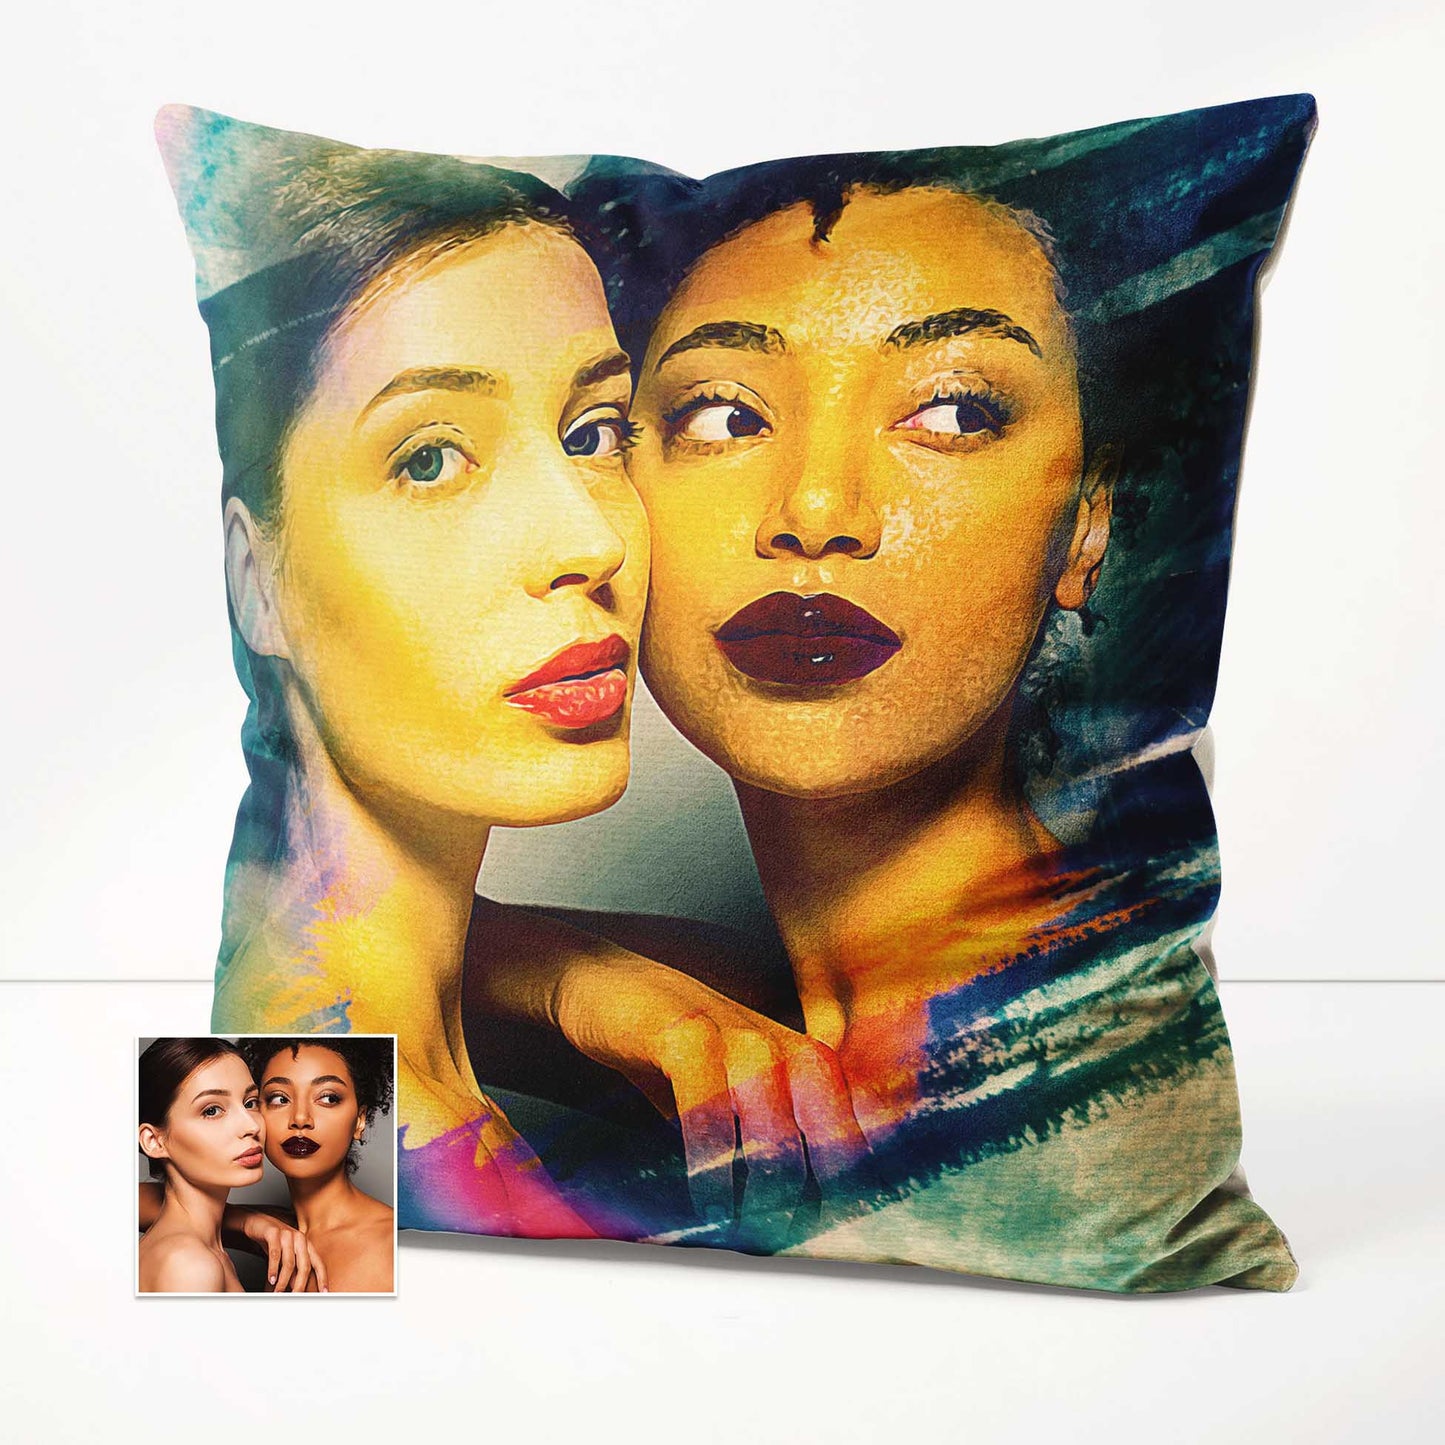 Infuse your home with artistic energy using the Personalised Artistic Brush Painting Cushion. This handmade masterpiece features a print from your photo on soft velvet fabric, creating a unique and original piece for your interior decor